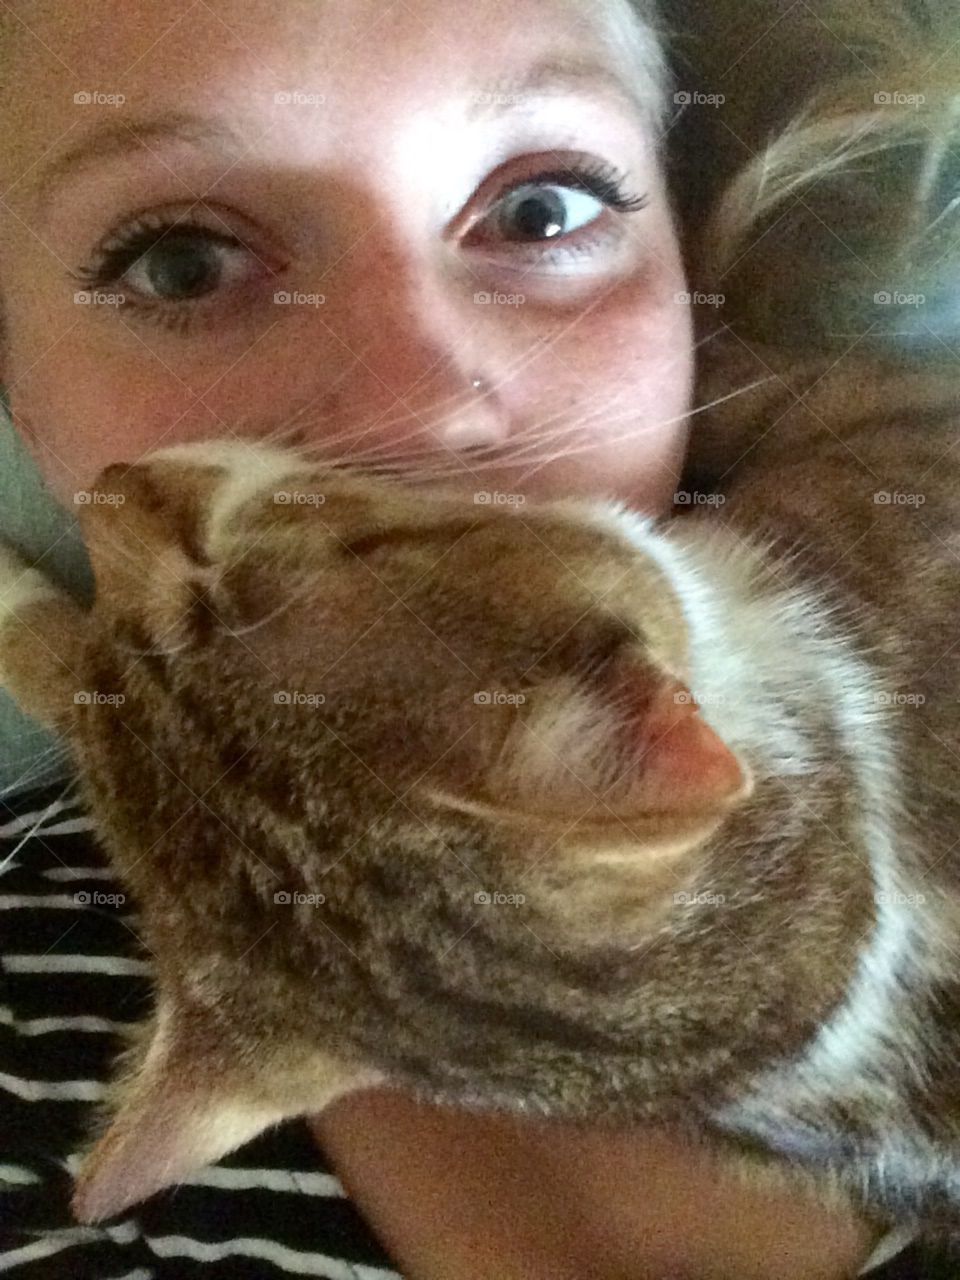 My cat's most favorite place to sleep is on my face 